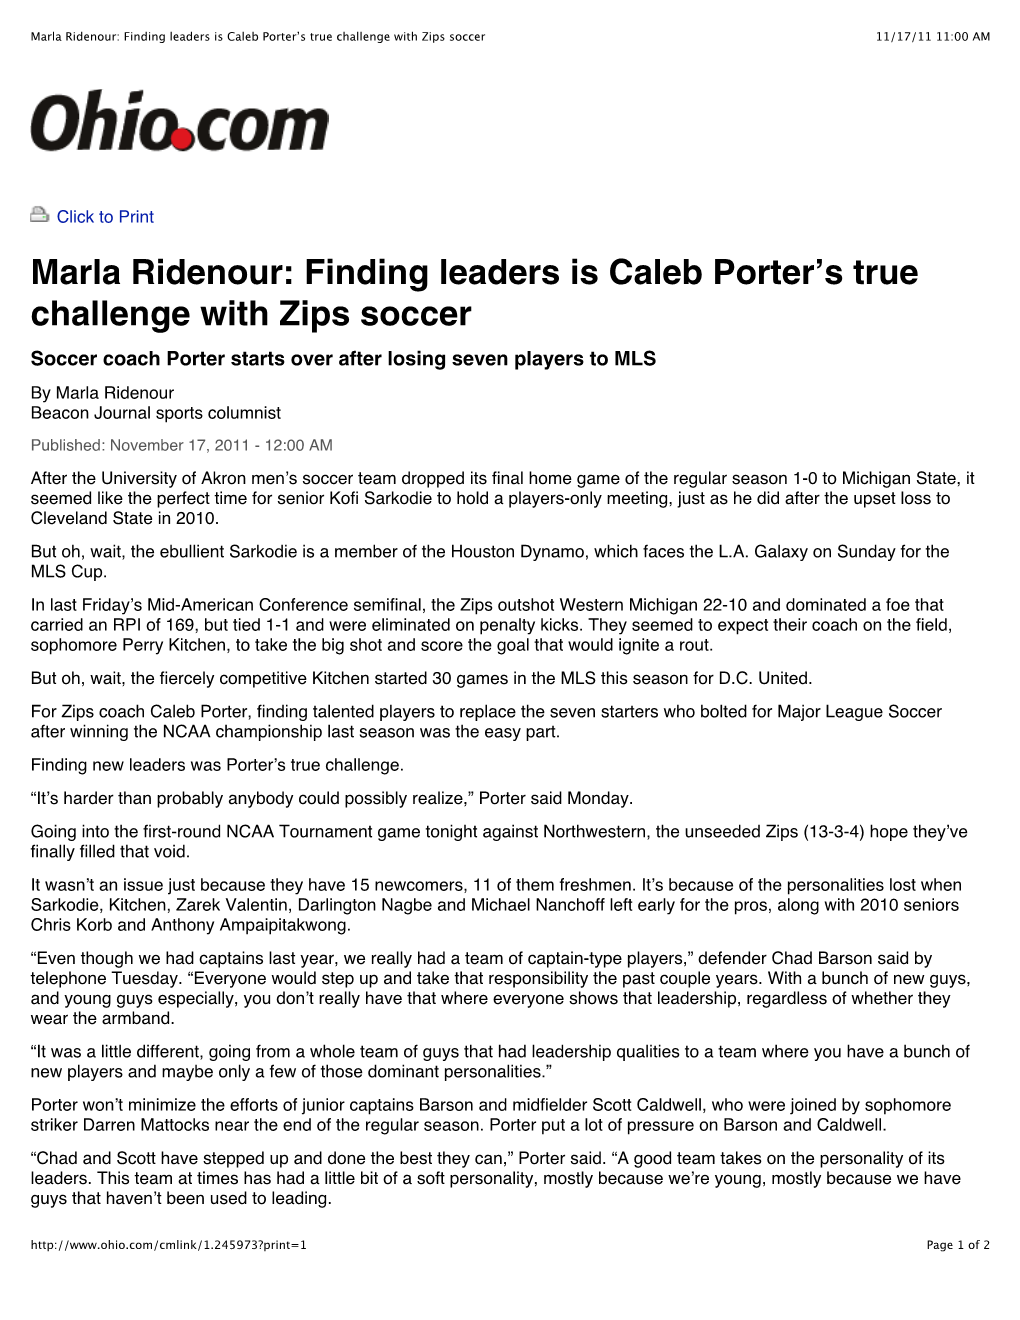 Marla Ridenour Finding Leaders Is Caleb Porter's True Challenge With